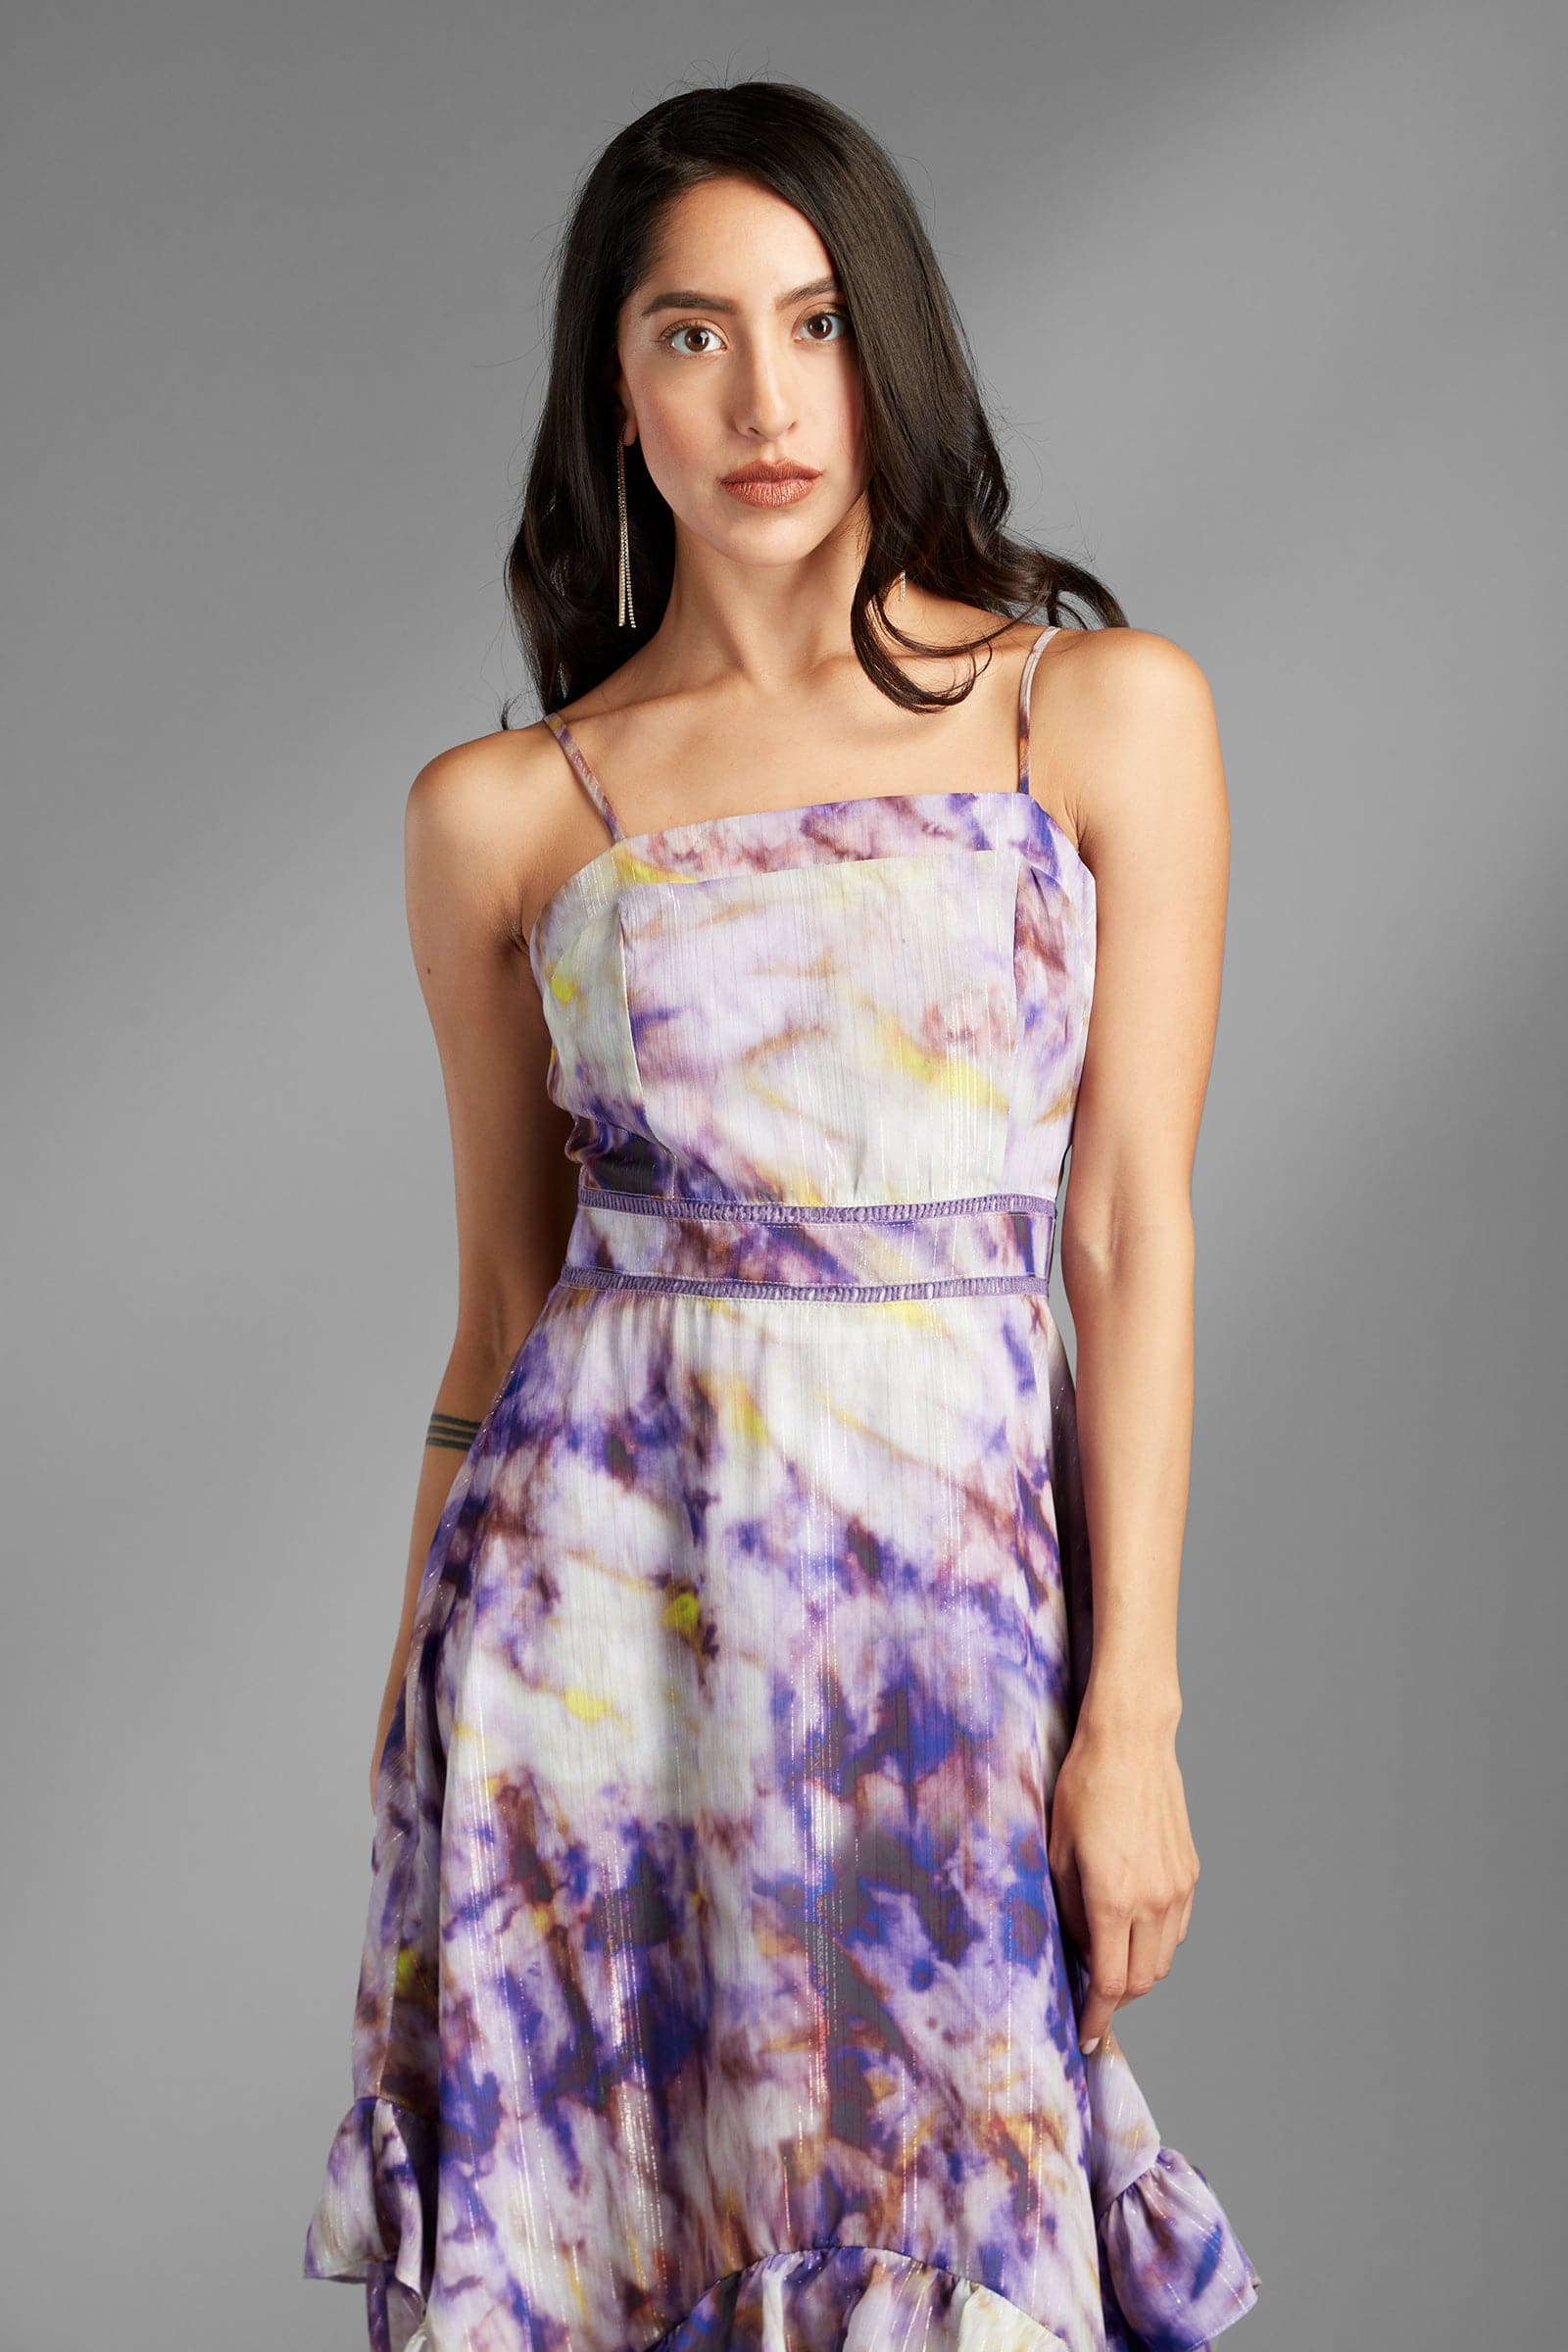 Avah-Couture-Starlyn-Purple-Asymmetrical-Abstract-Midi-Dress